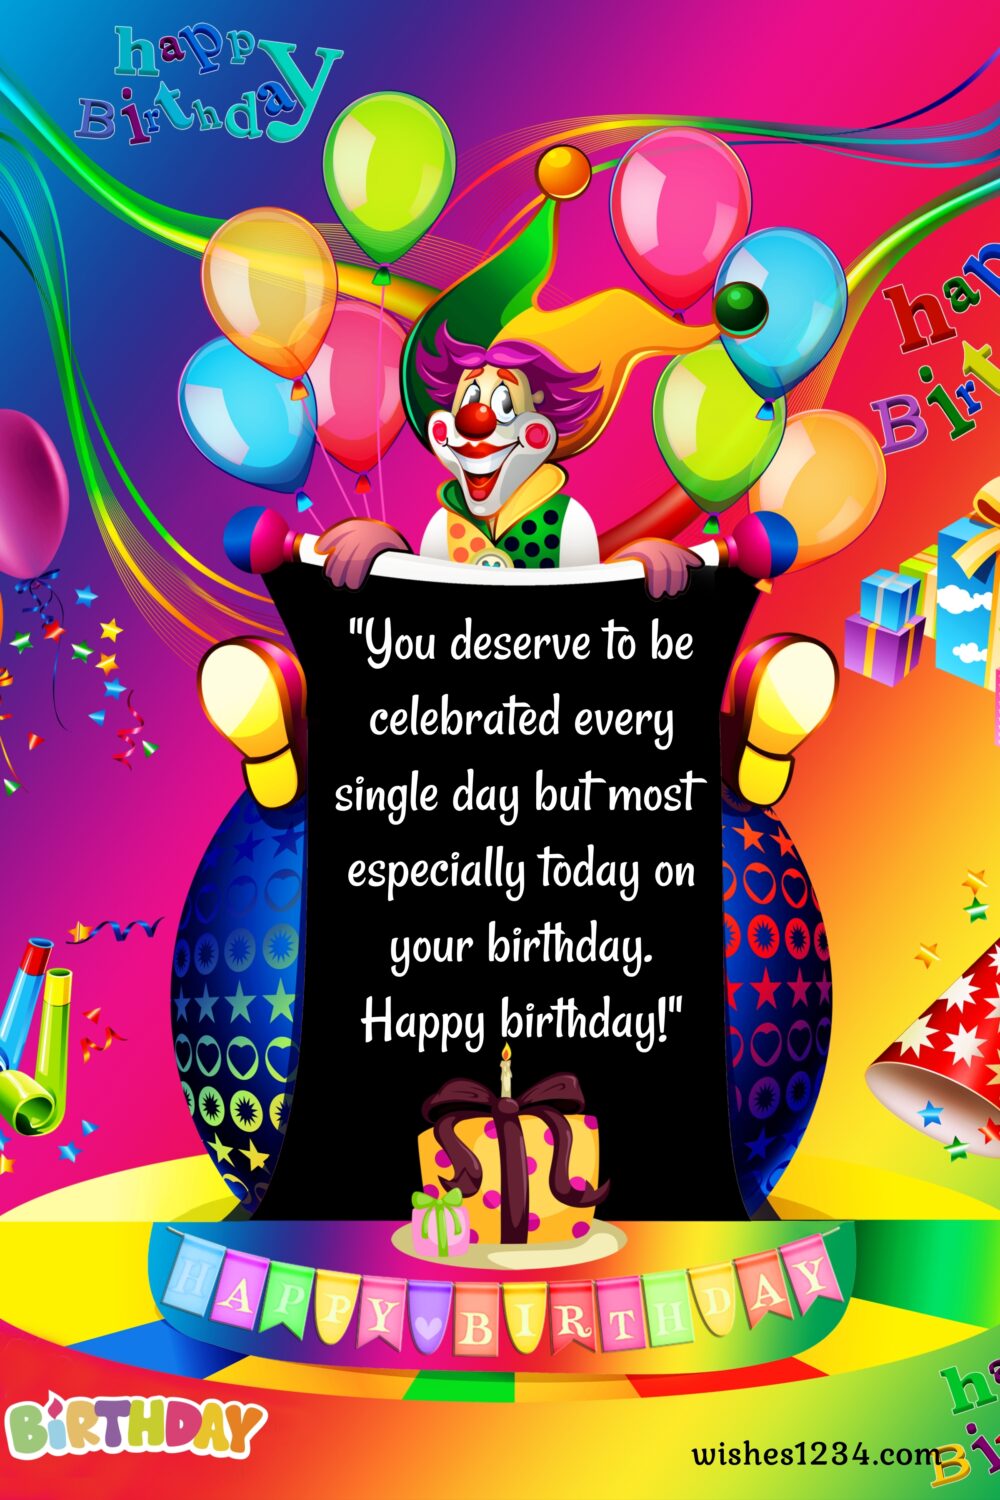 Clown holding birthday poster with balloons, Kids birthday | Happy Birthday wishes for kids.